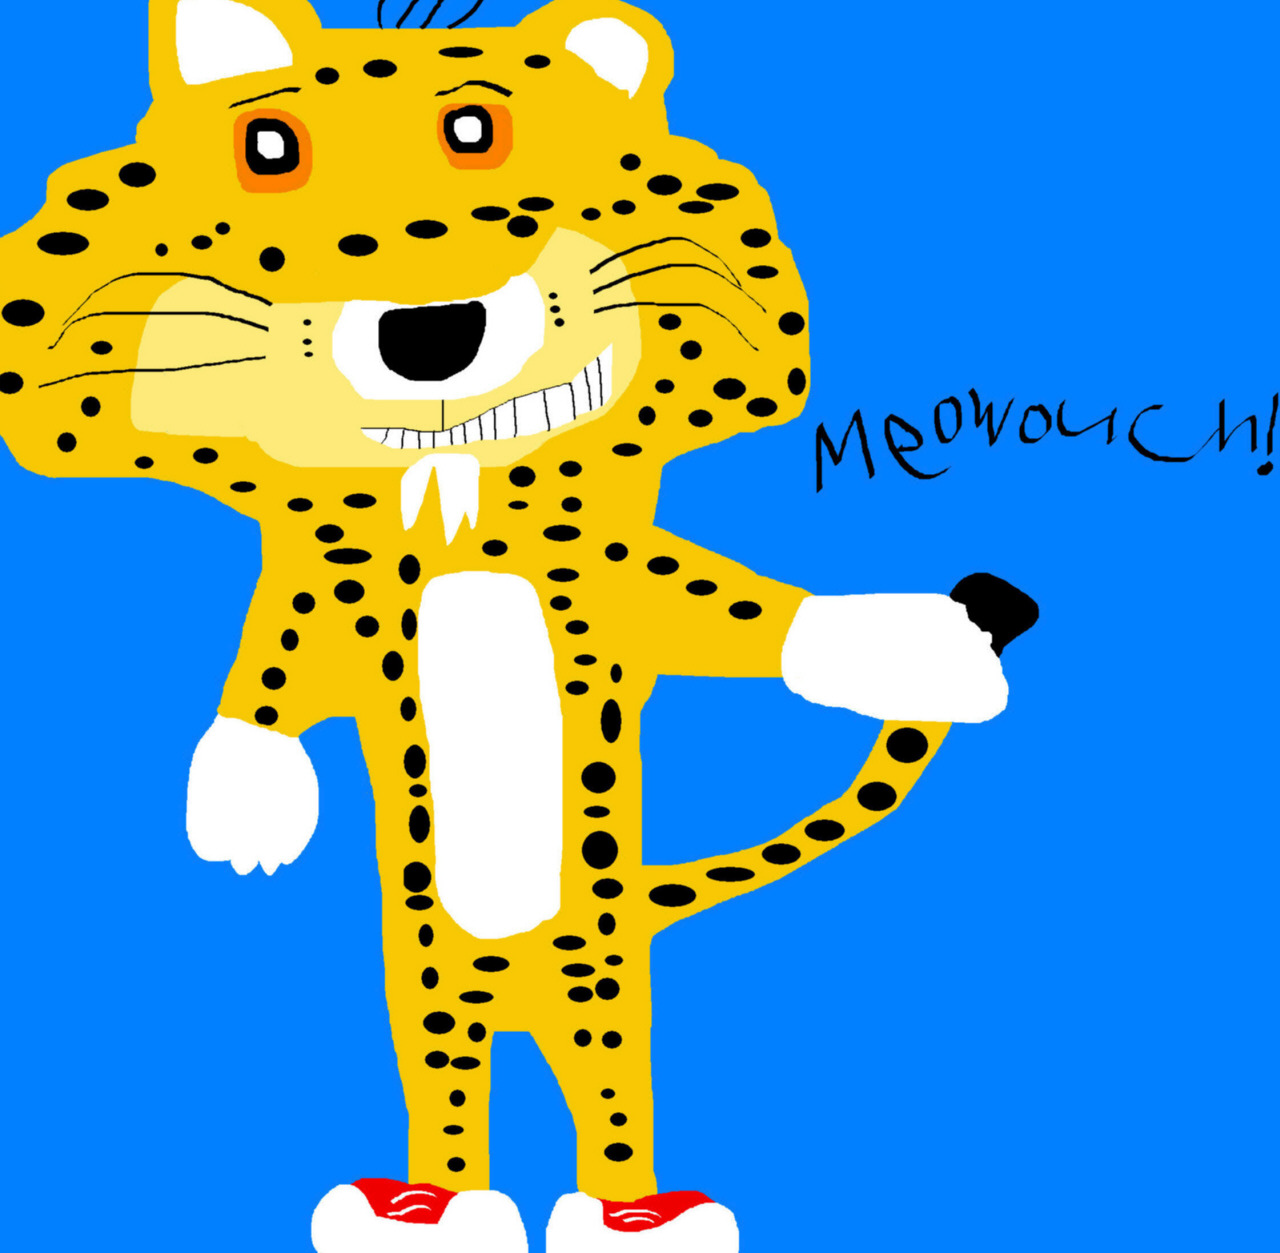 Meowouch No Shades MS Paint^^ by Falconlobo